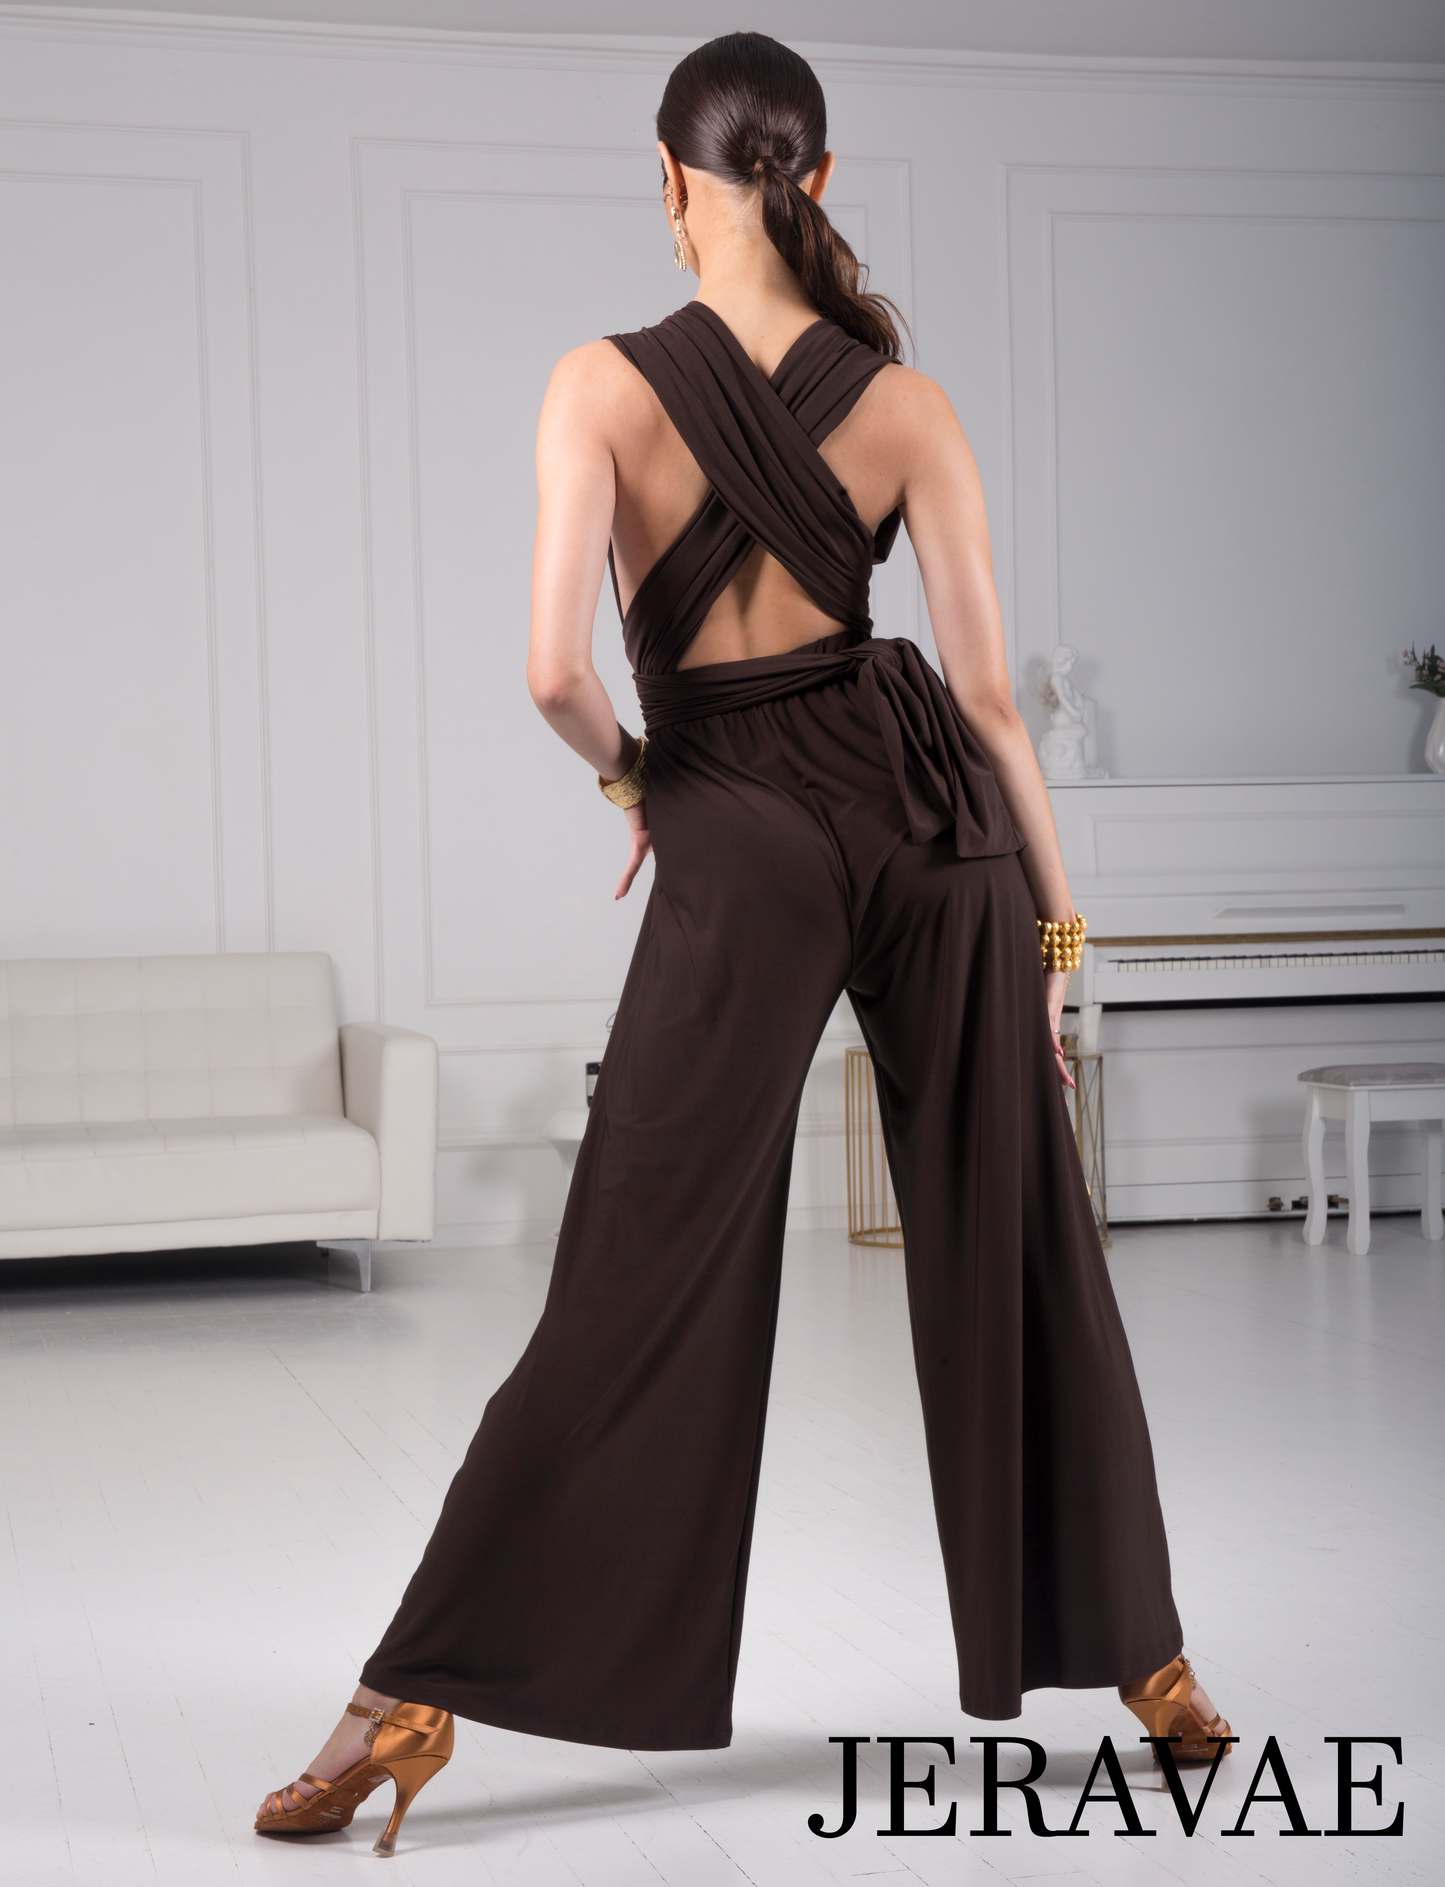 Senga Dancewear CALYPSO One Piece Jumpsuit with Strips of Material to Customize Your Look and Wide Leg Pants Available in Brown and Black PRA 976 in Stock